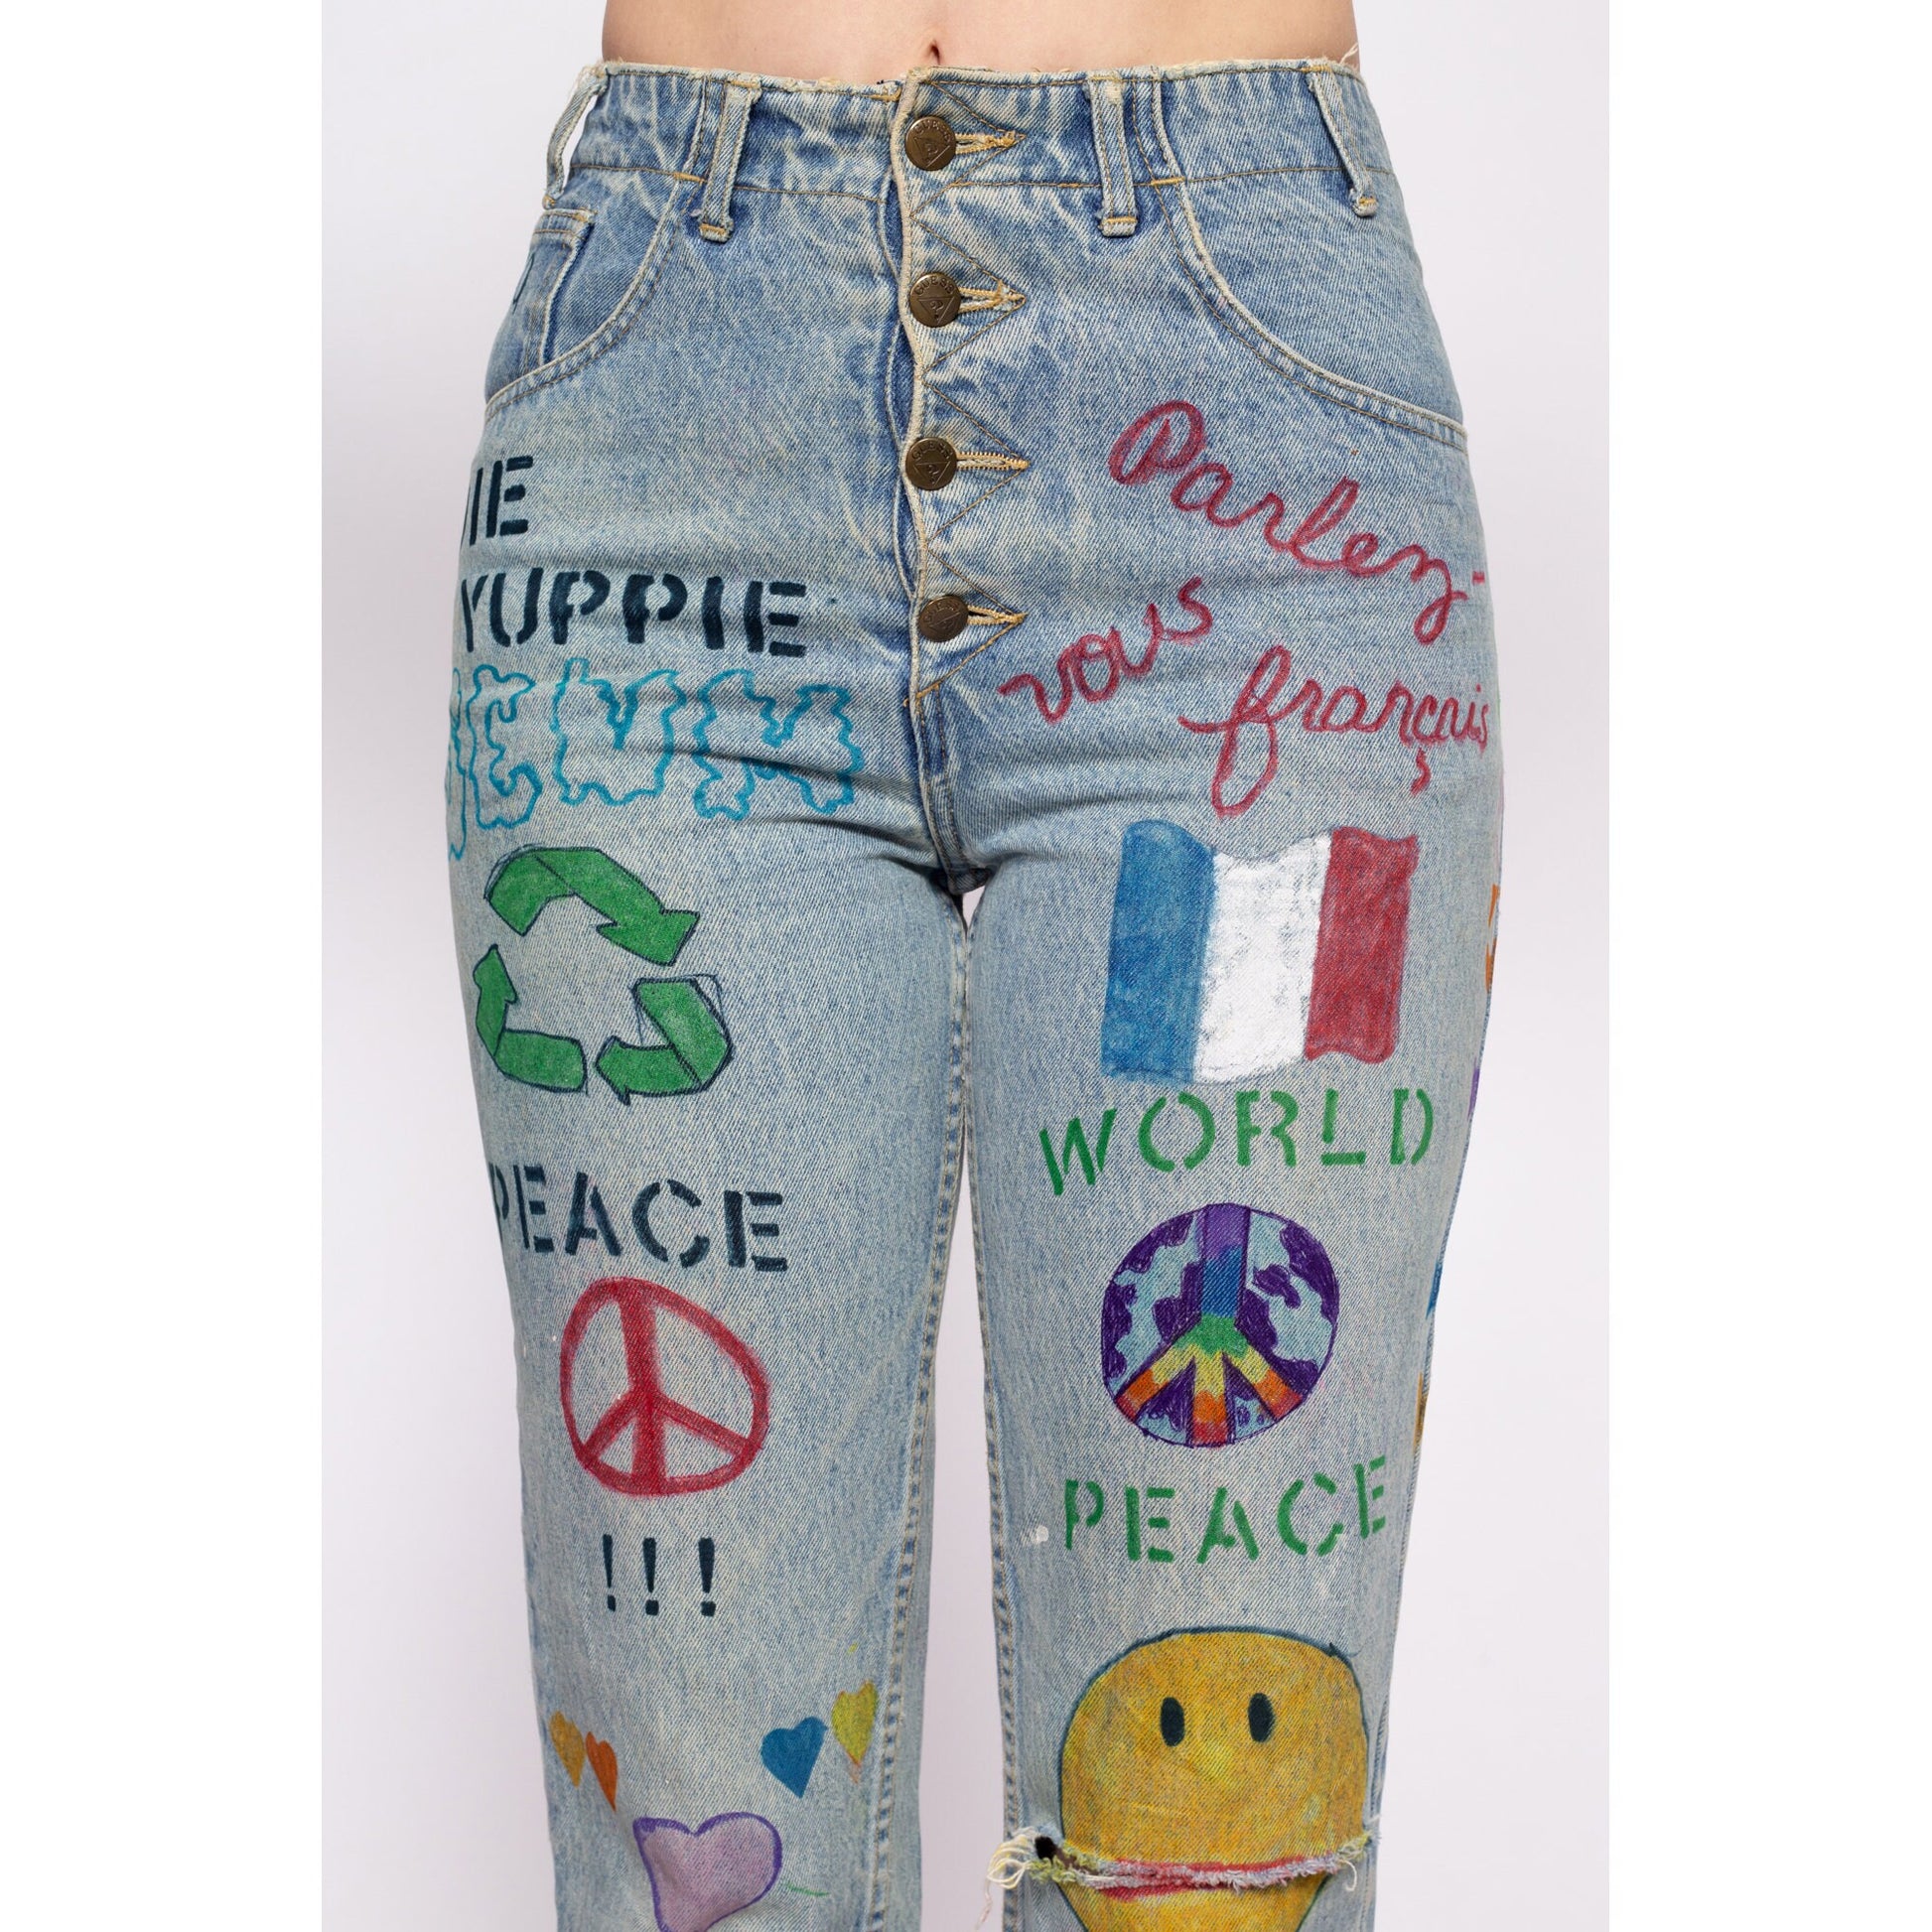 90s Guess Hand Painted Graffiti Jeans - Small, 26"